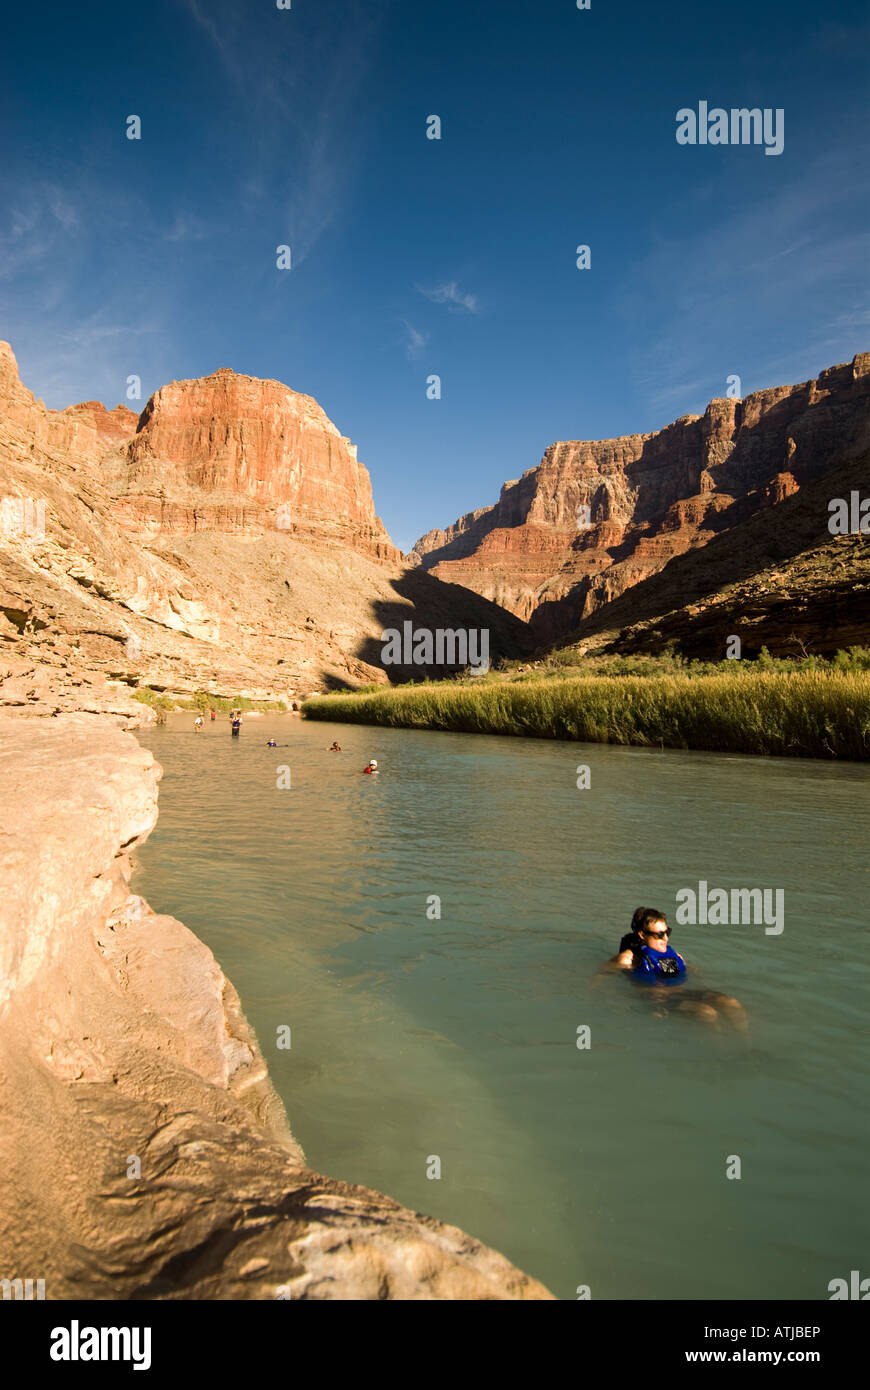 Man floating down the aqua blue water of the Little Colorado River, a tributary to the Colorado River, Grand Canyon, Arizona. Stock Photo